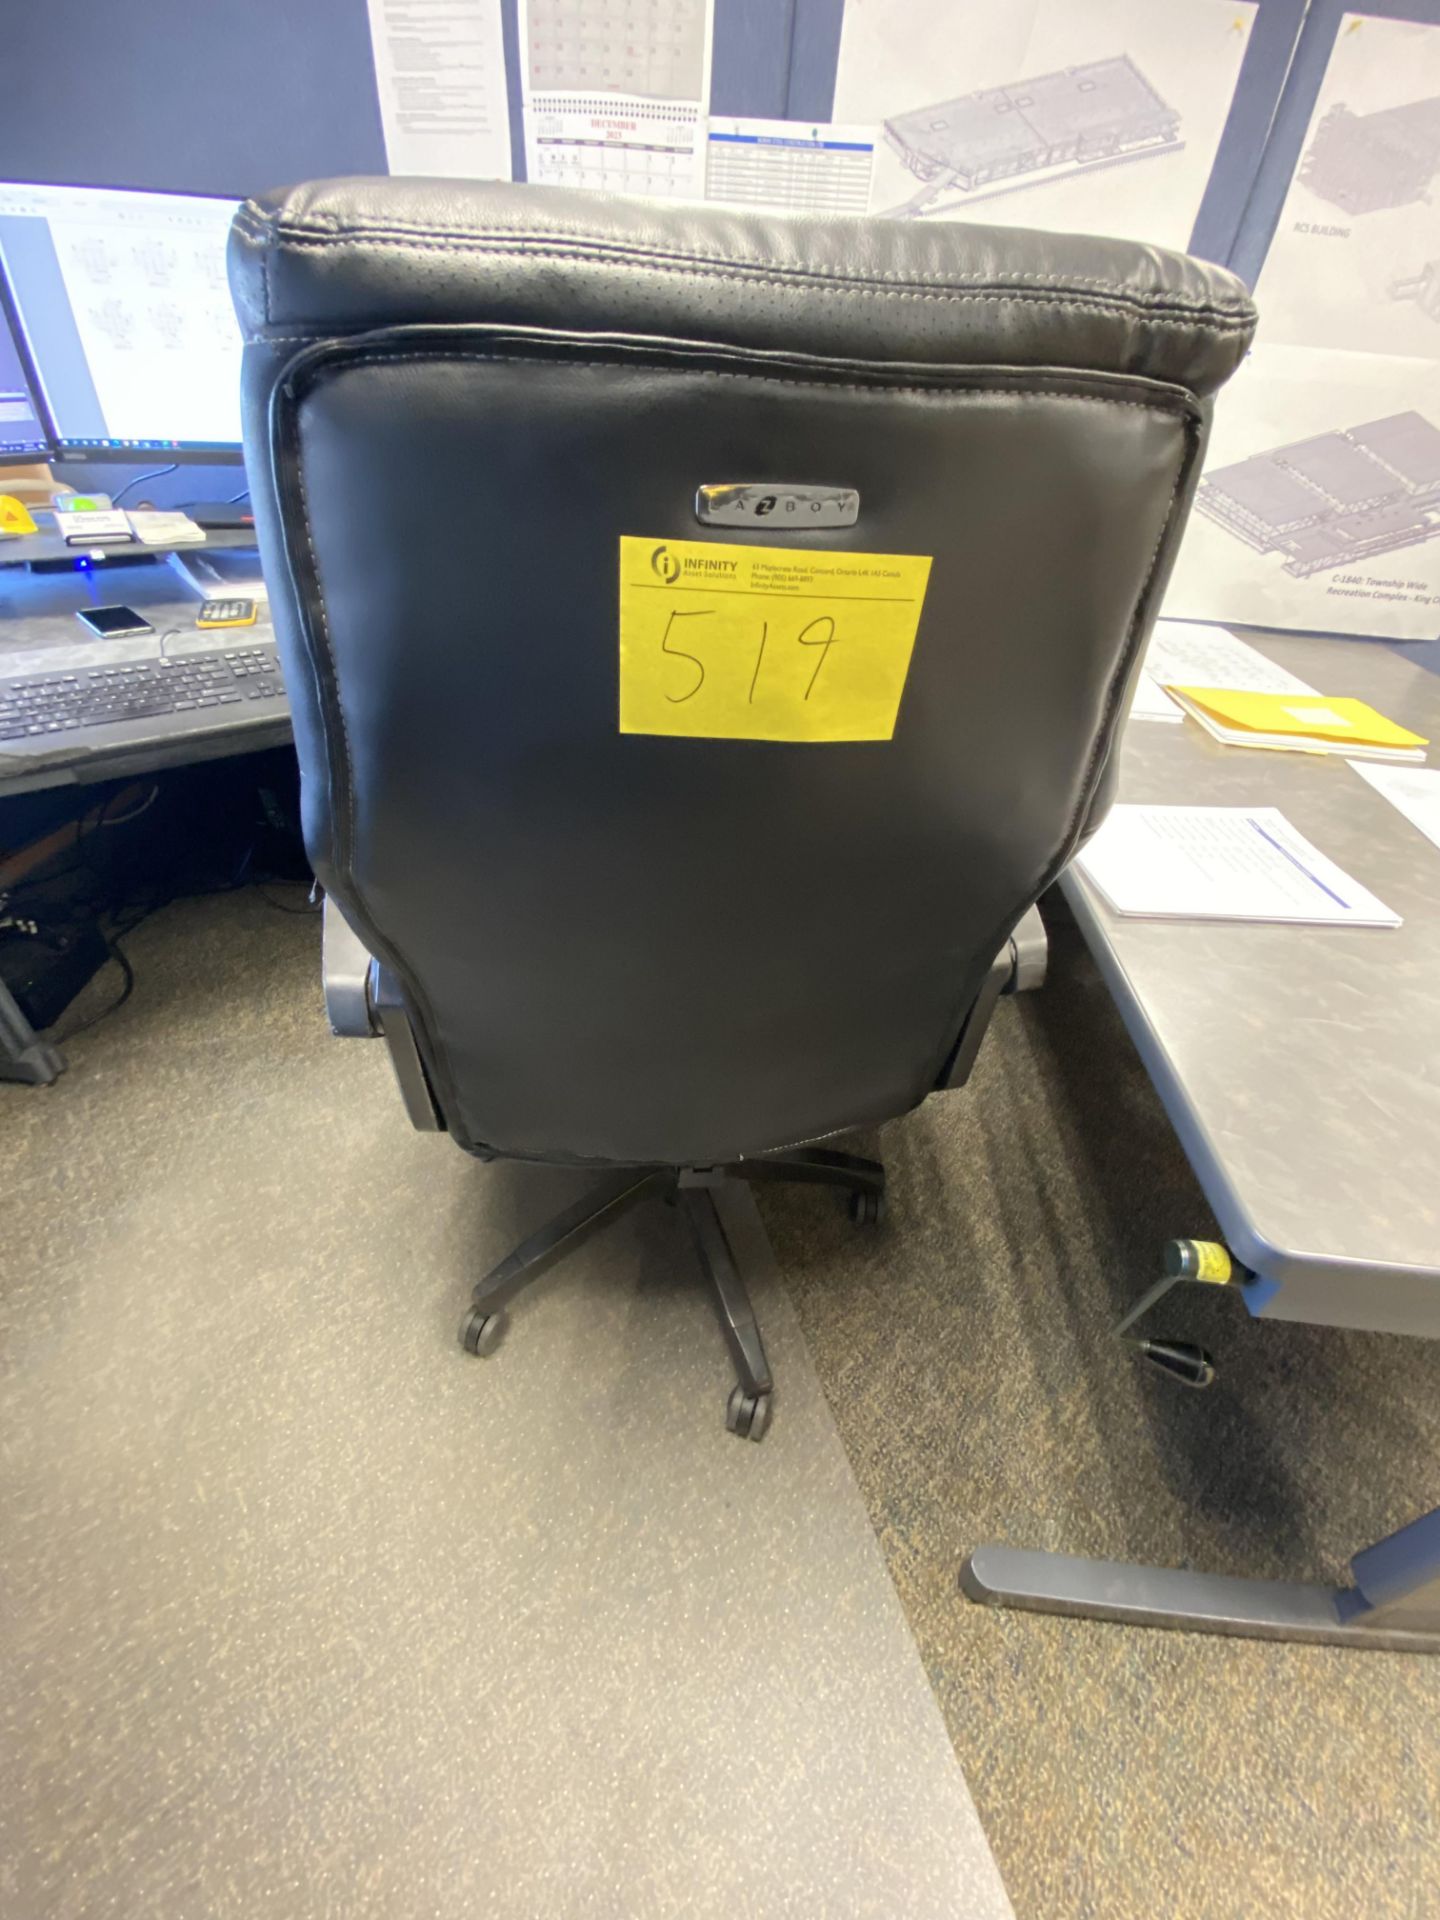 LAZYBOY HIGH BACK SWIVEL CHAIR (NOTE: SUBJECT TO LATE REMOVAL, PICKUP ON FRIDAY APRIL 26TH) - Image 2 of 2